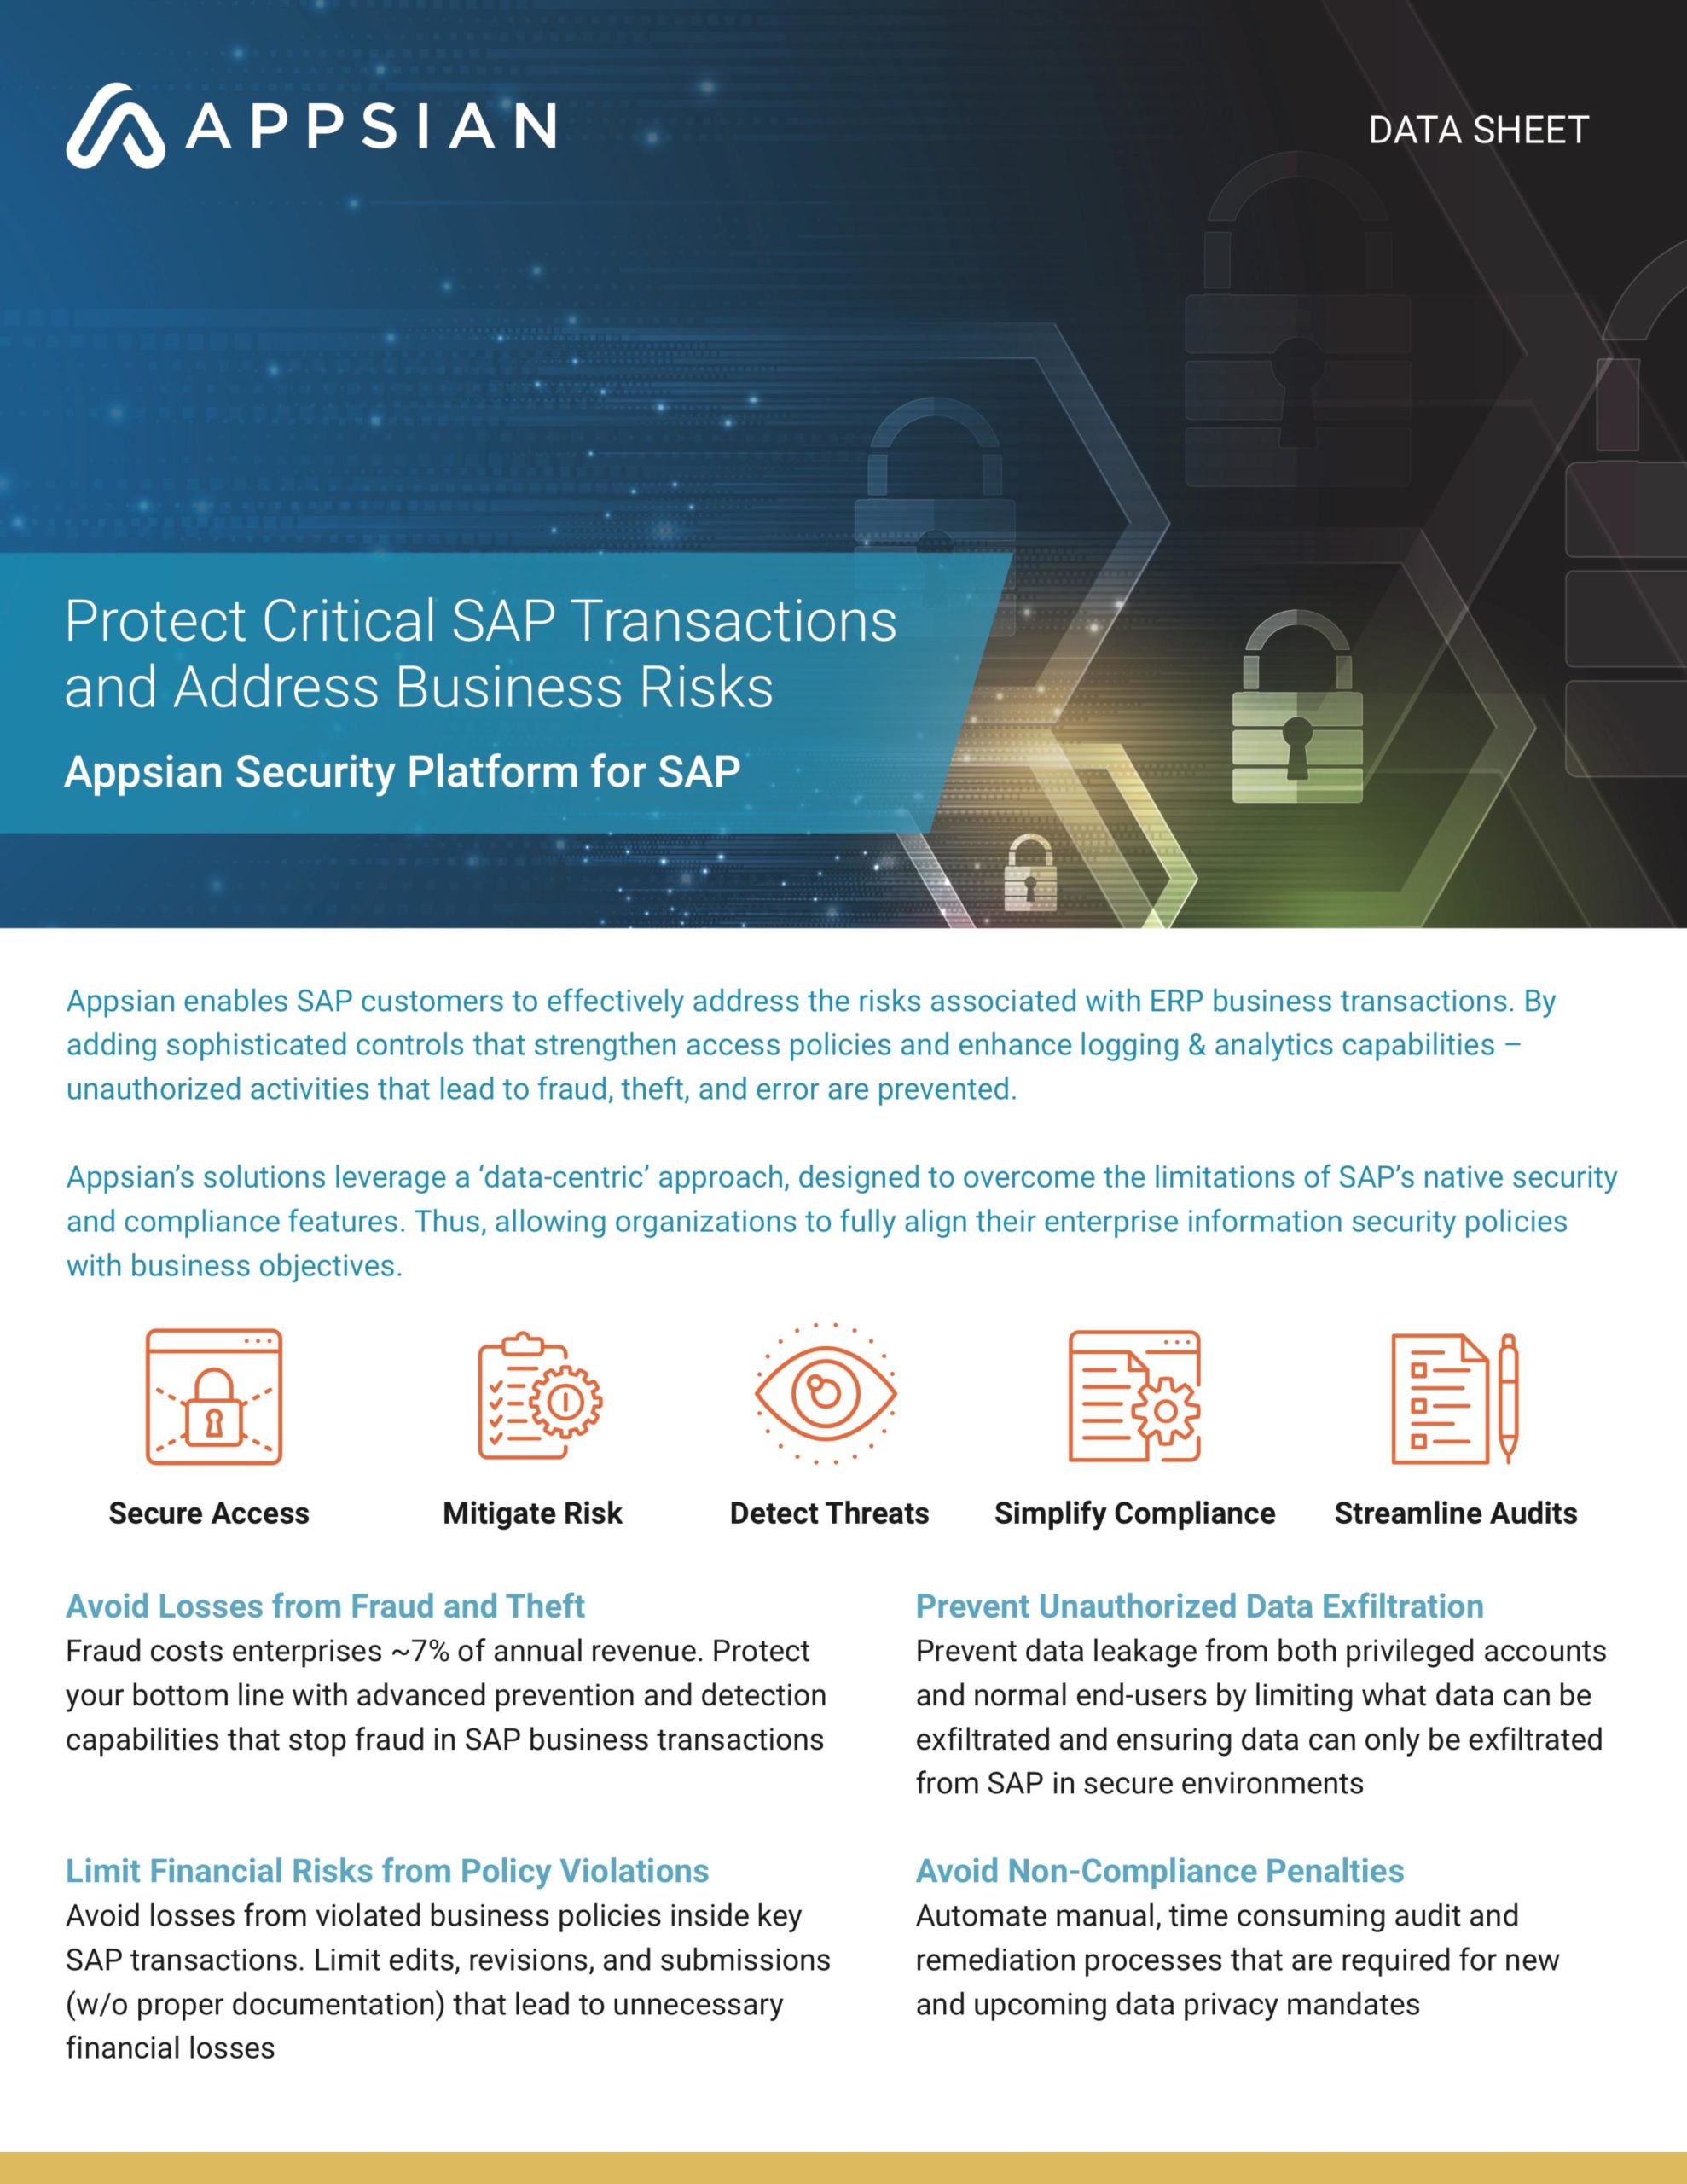 How to Prevent Fraud and Theft in SAP ERP Transactions